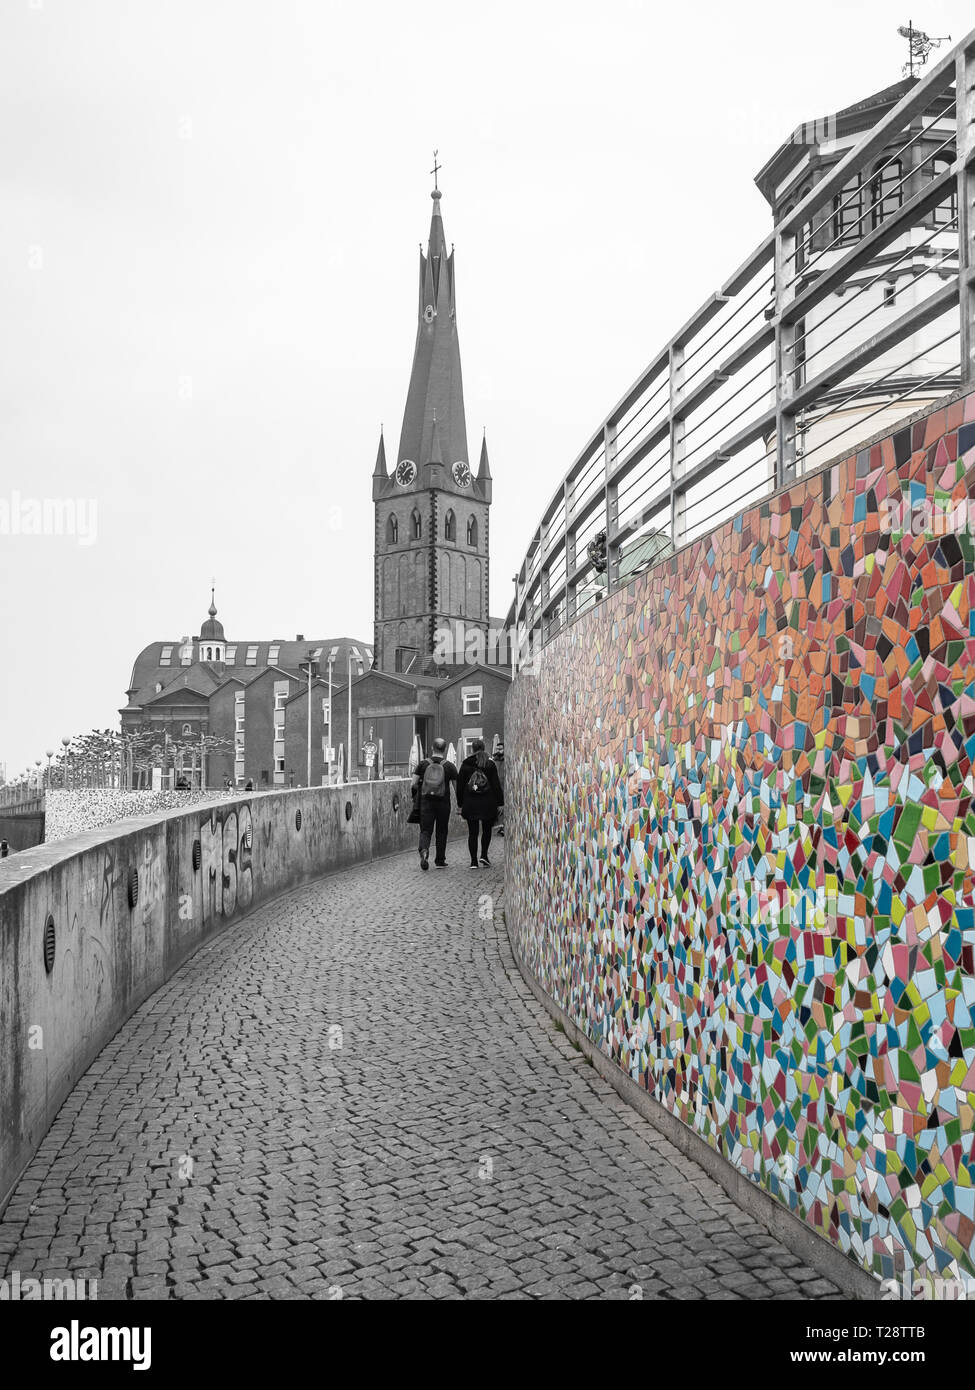 Düsseldorf, Germany, 23 March 2019. People walking up to old town in front of colorful Mosaic on the promenade on the bank of river Rhine. Stock Photo